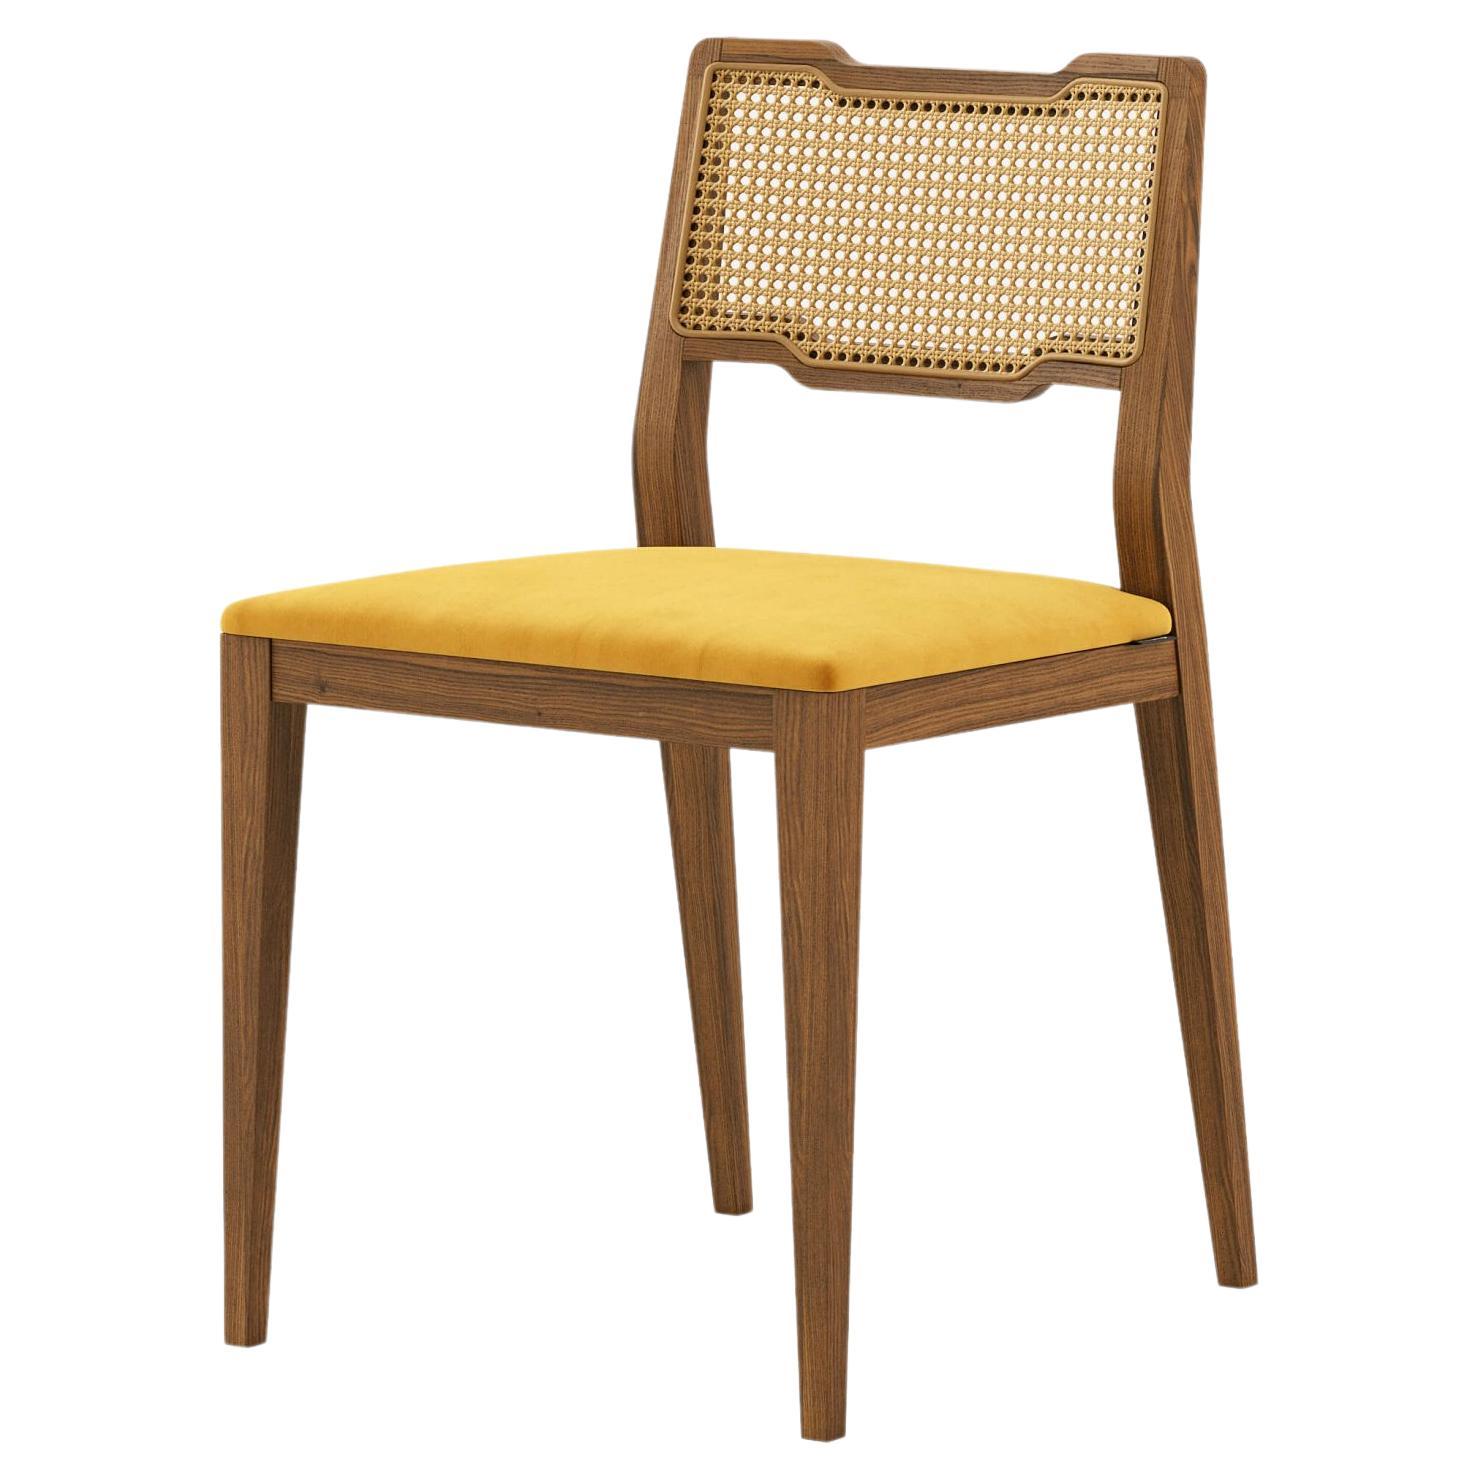 Contemporary Dining Chair, Matte Walnut/Woven Cane For Sale